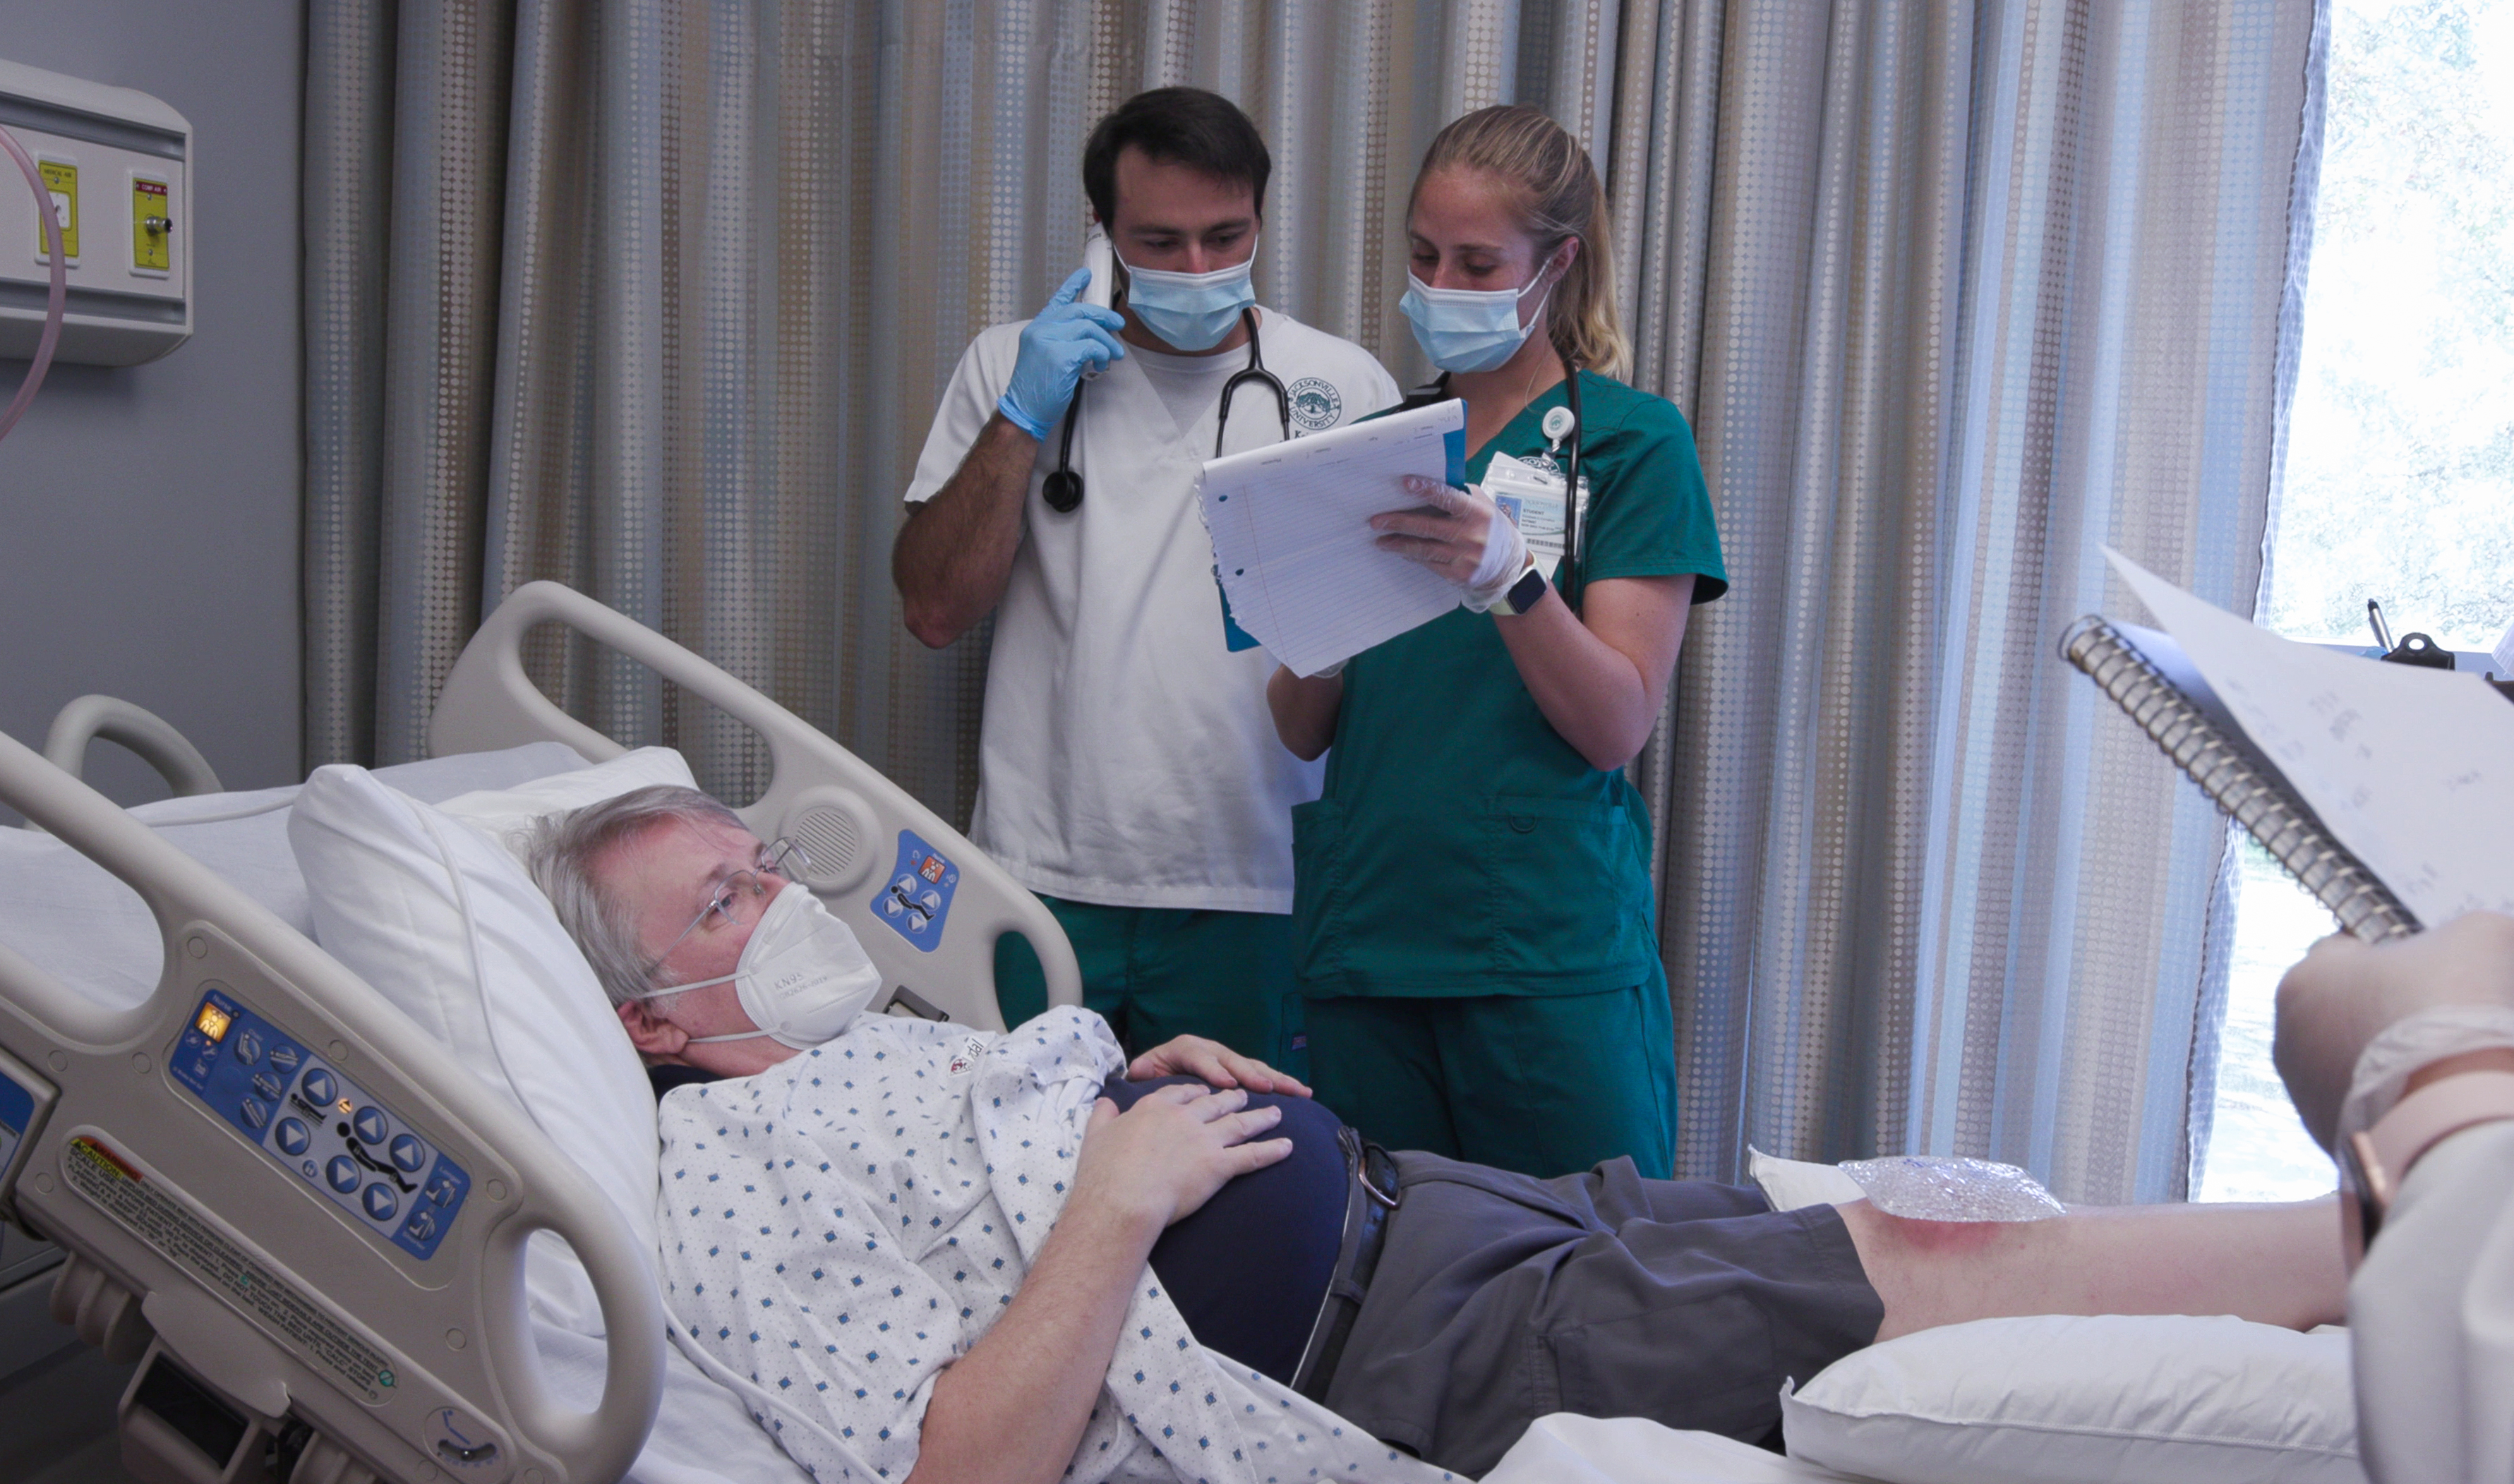 Two nursing students examining a patient